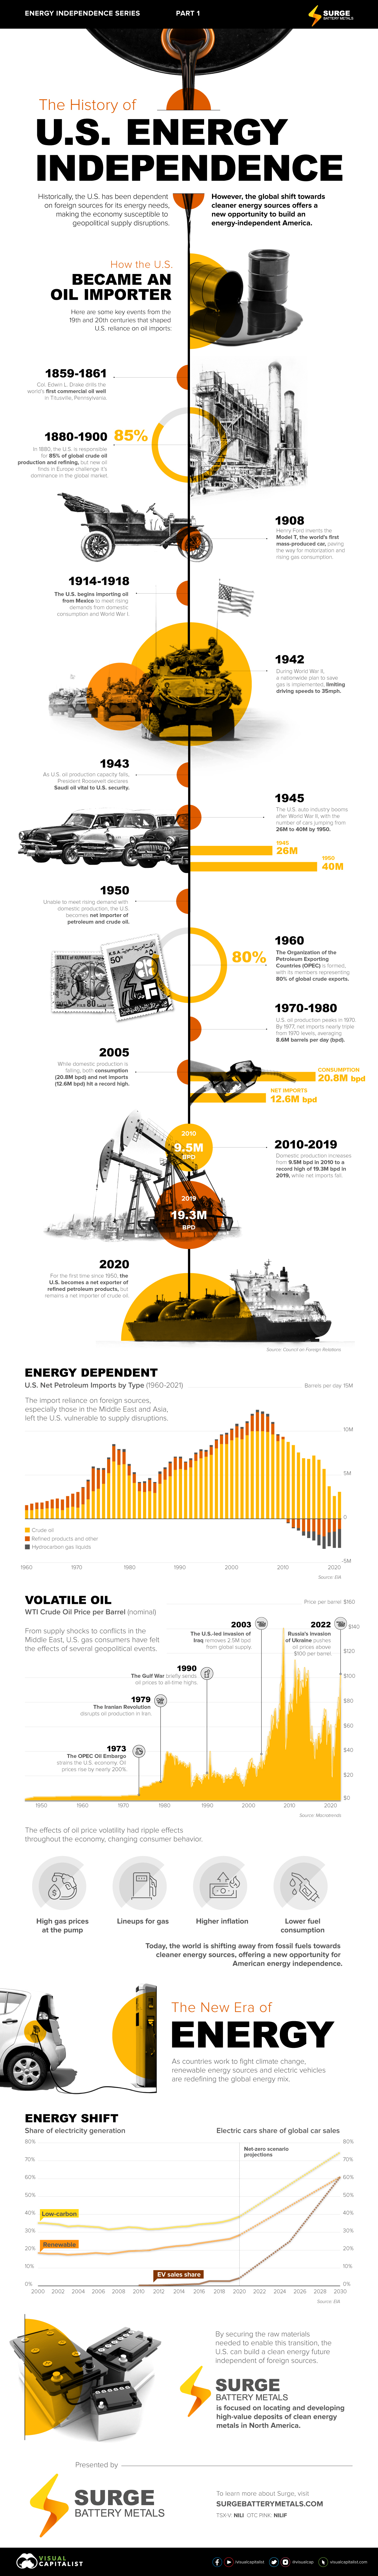 the history of us energy independence – visual capitalist